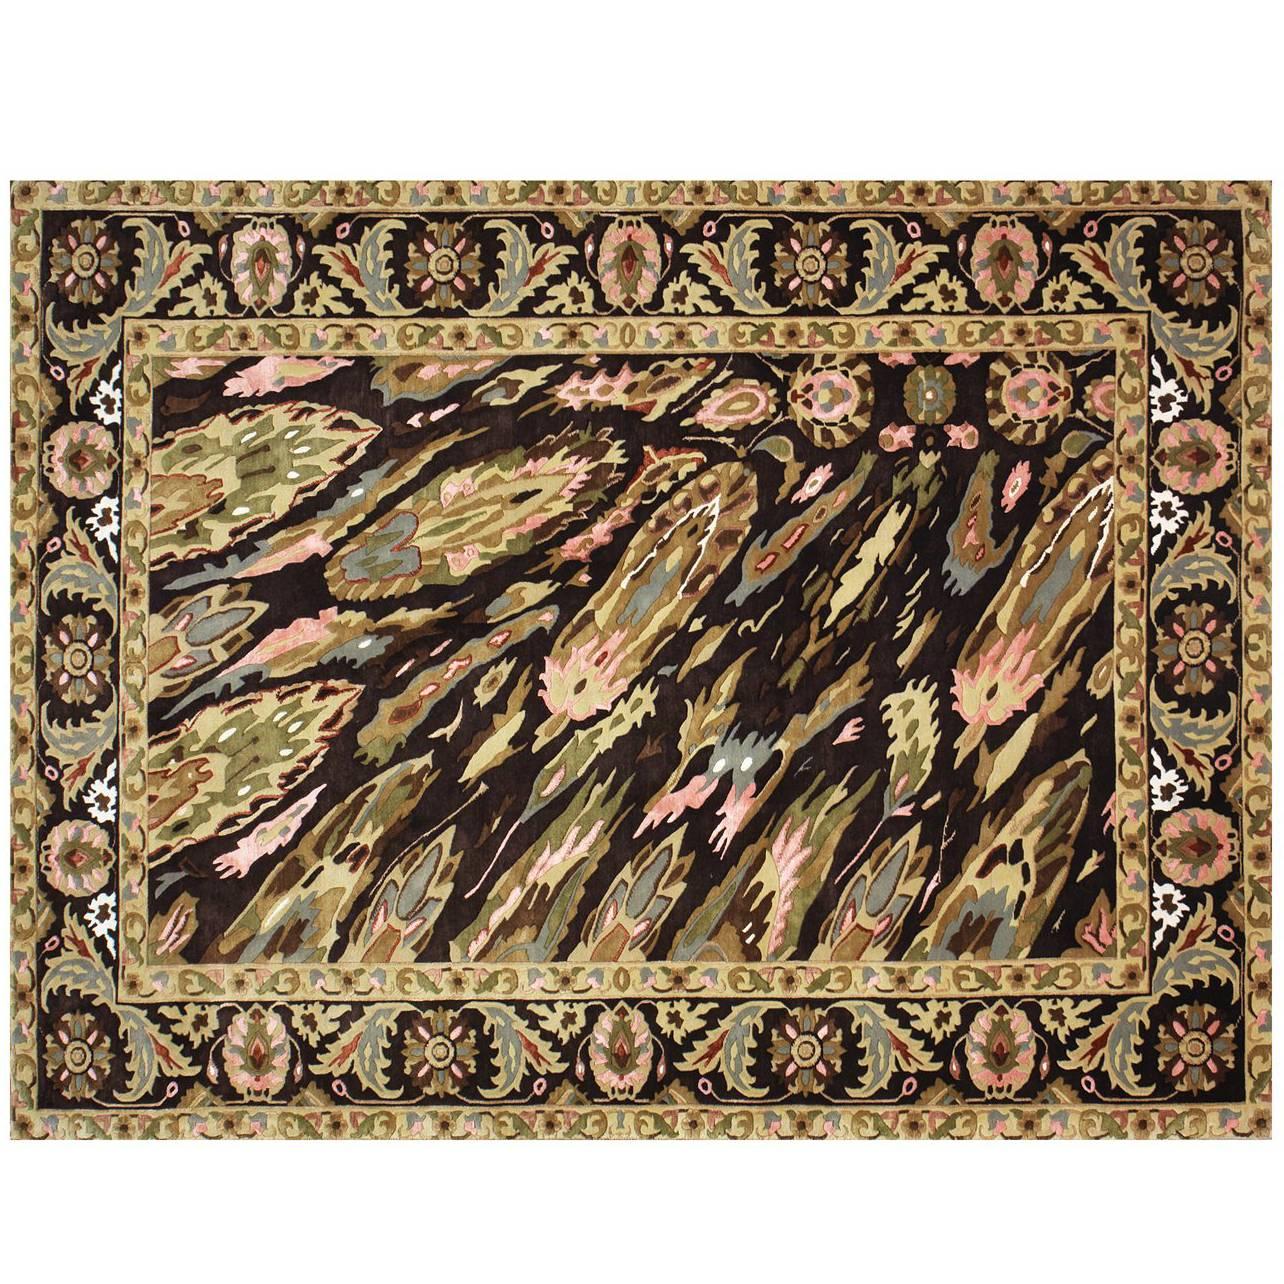 Hand Knotted Rug "Sima Pashtun" with Trompe-l'œil effect. 